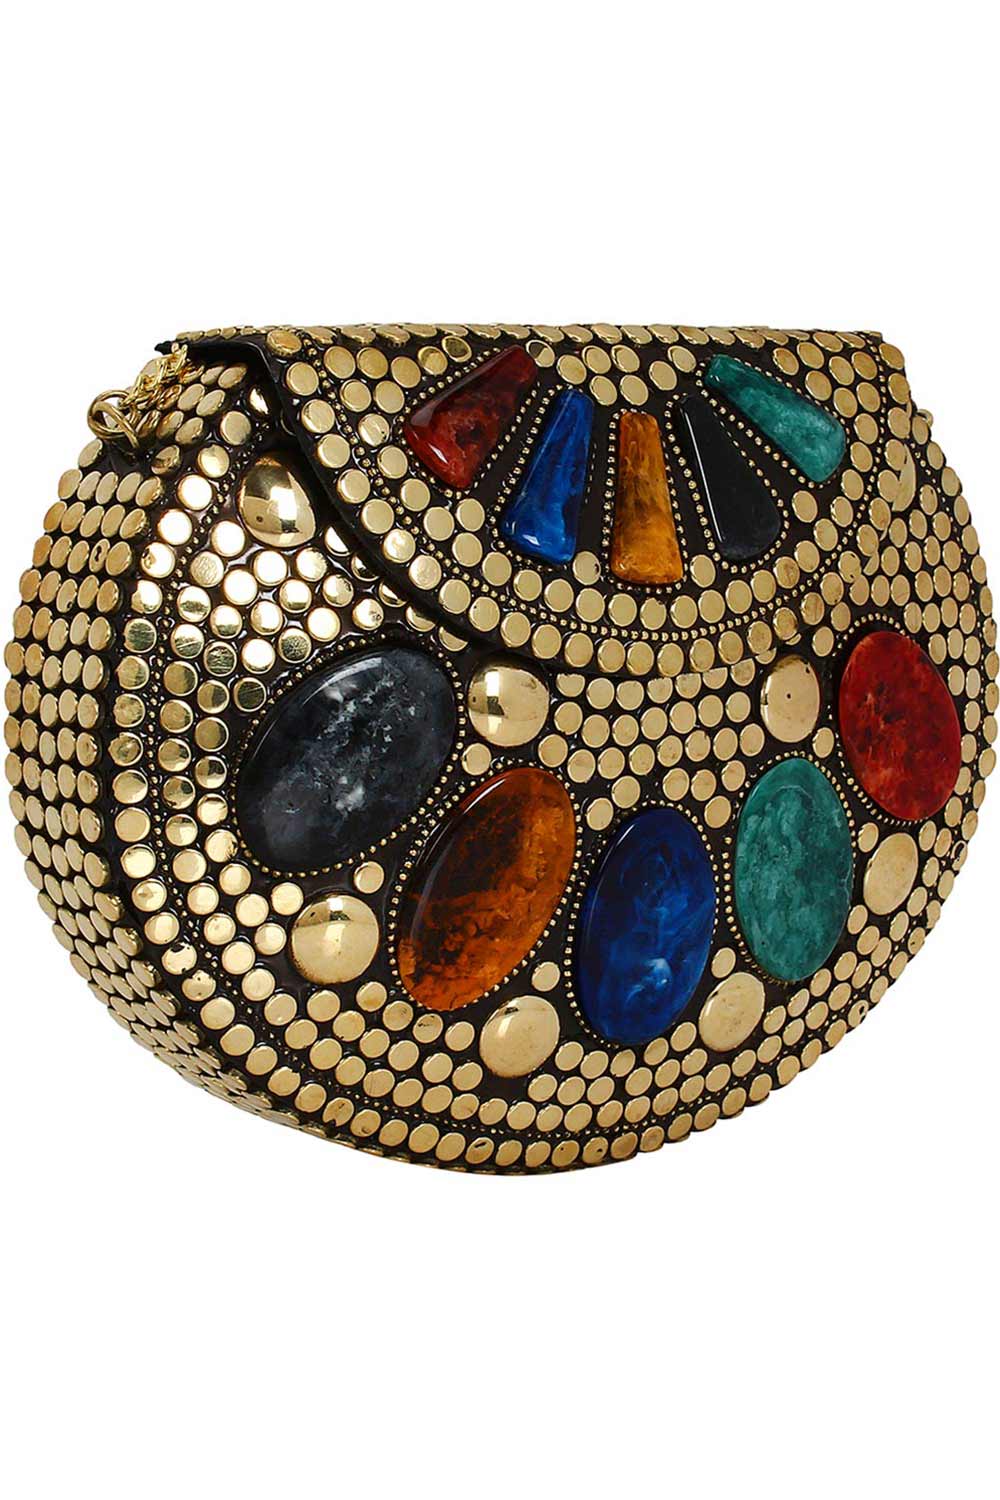 Jewel Mosaic Design Metal Work Party Clutch Bag Gold and Multi